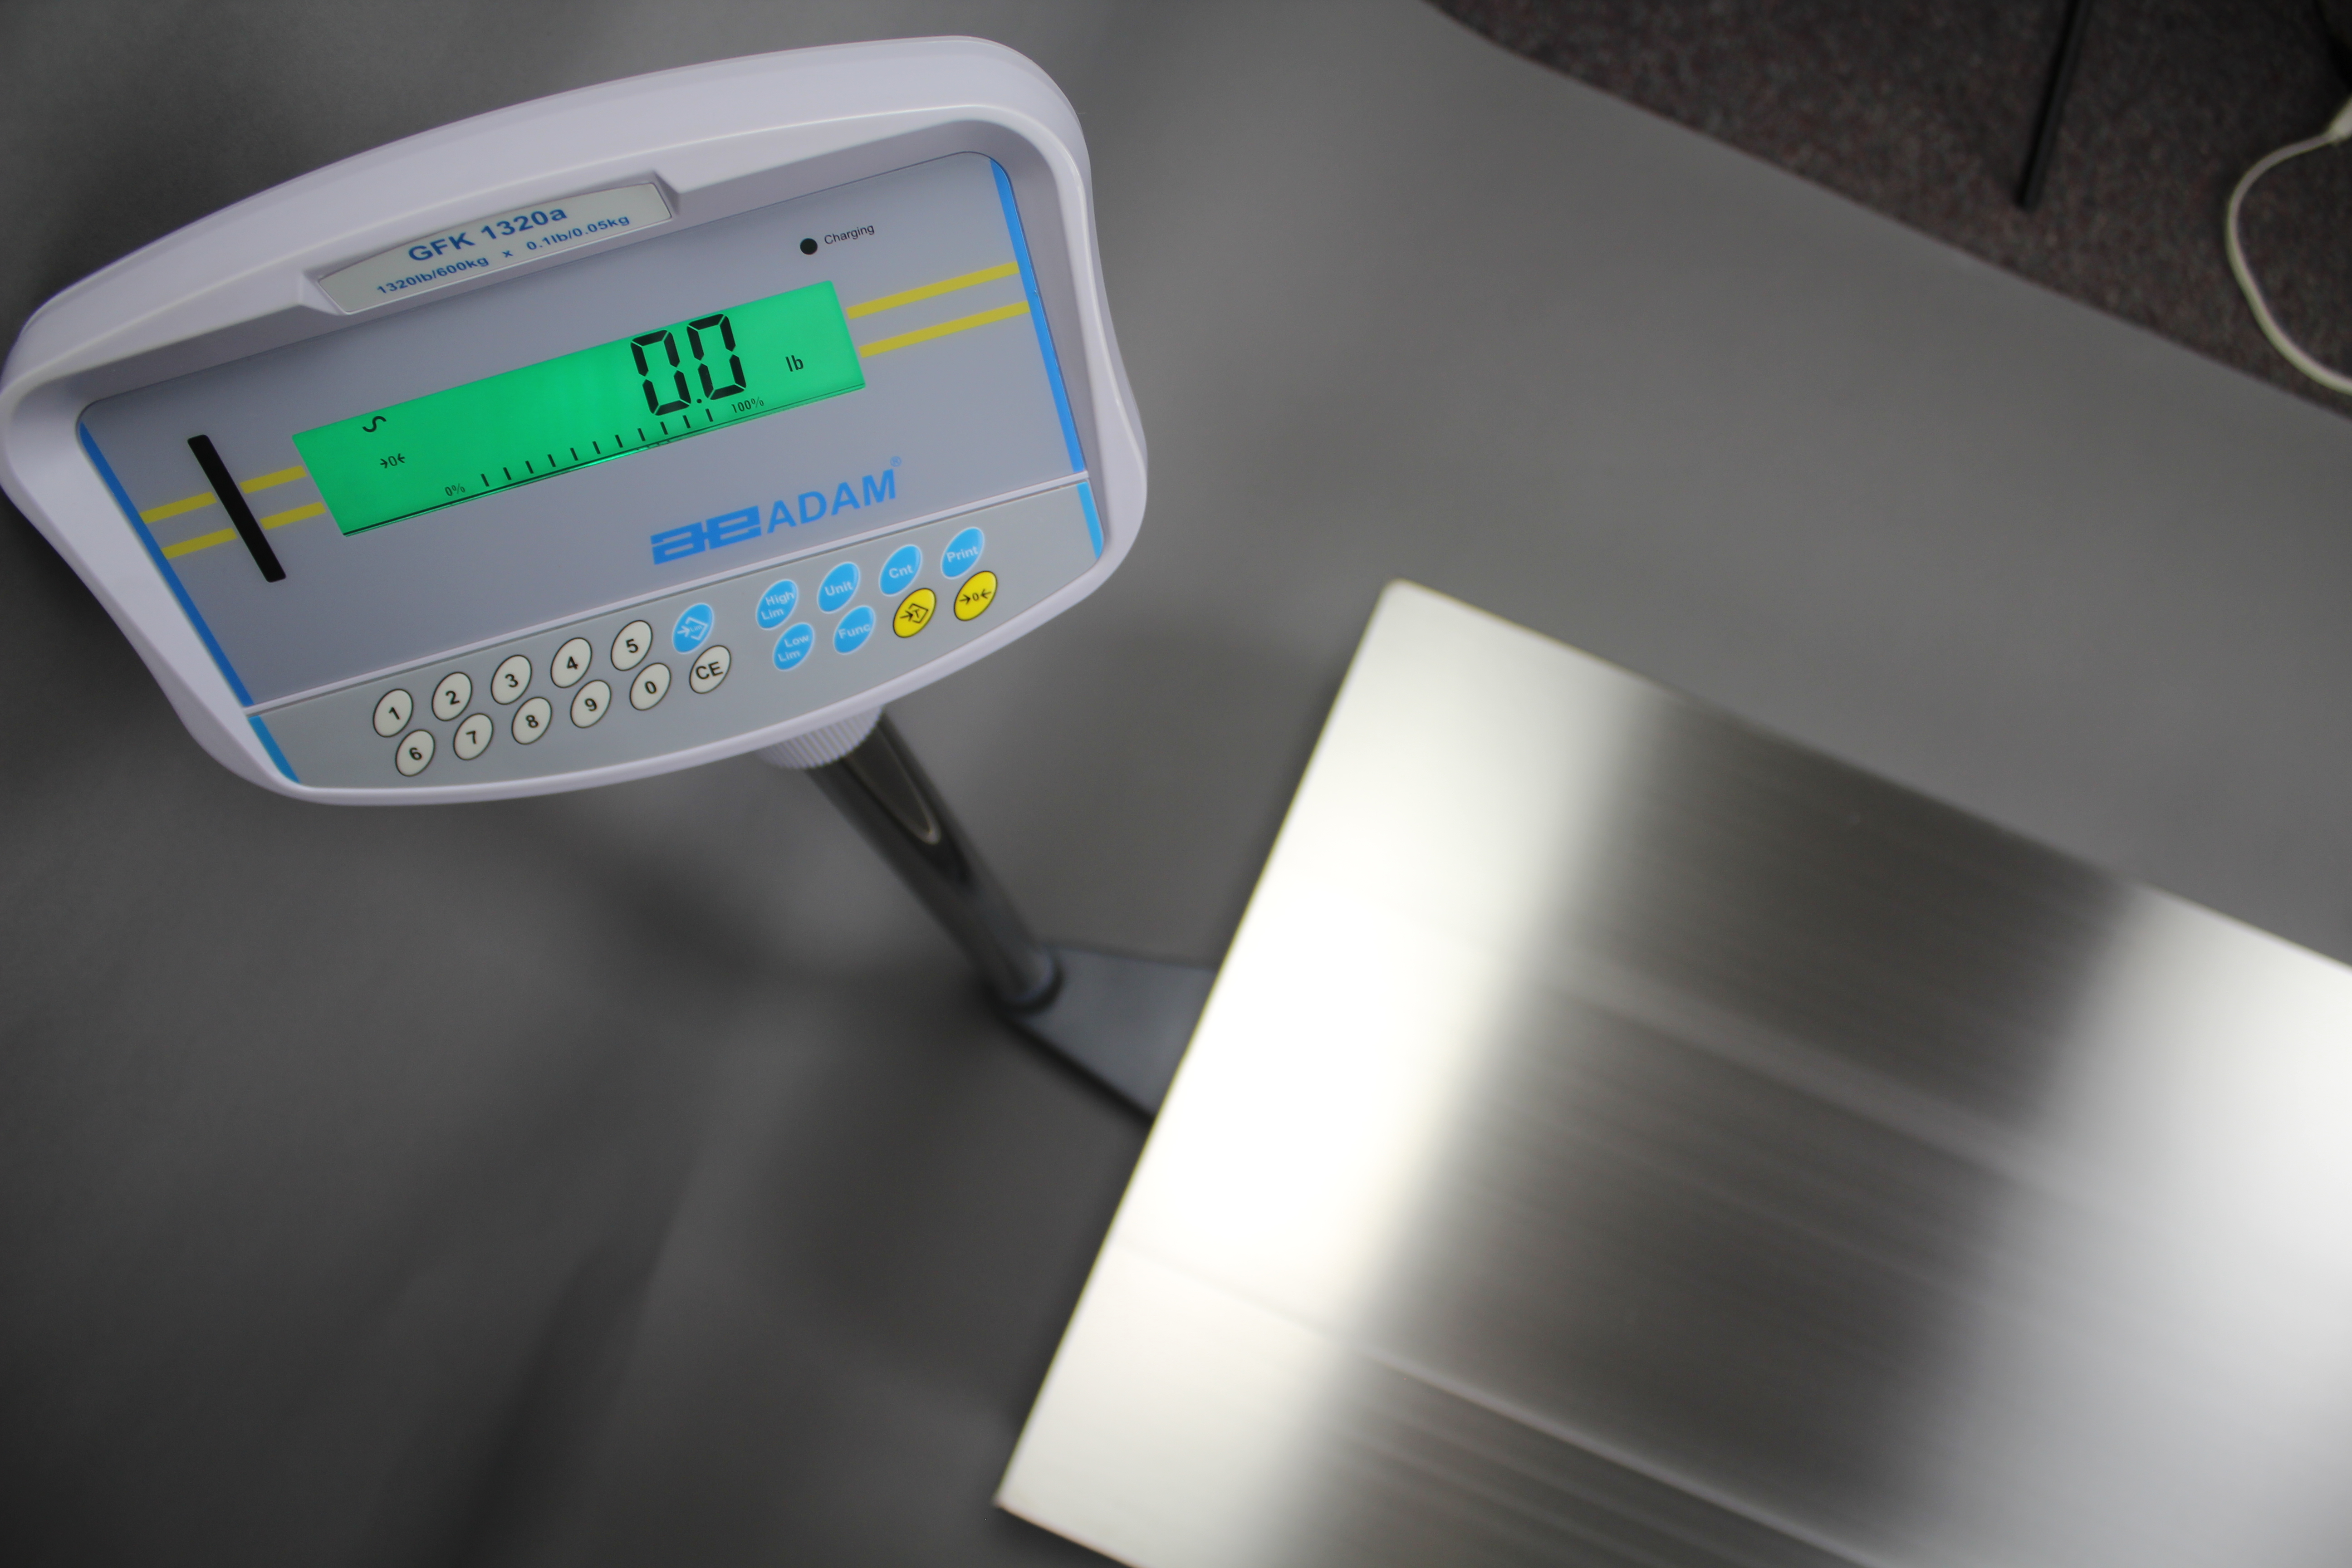 GBK-plus and GFK-plus bench and floor checkweighing scales